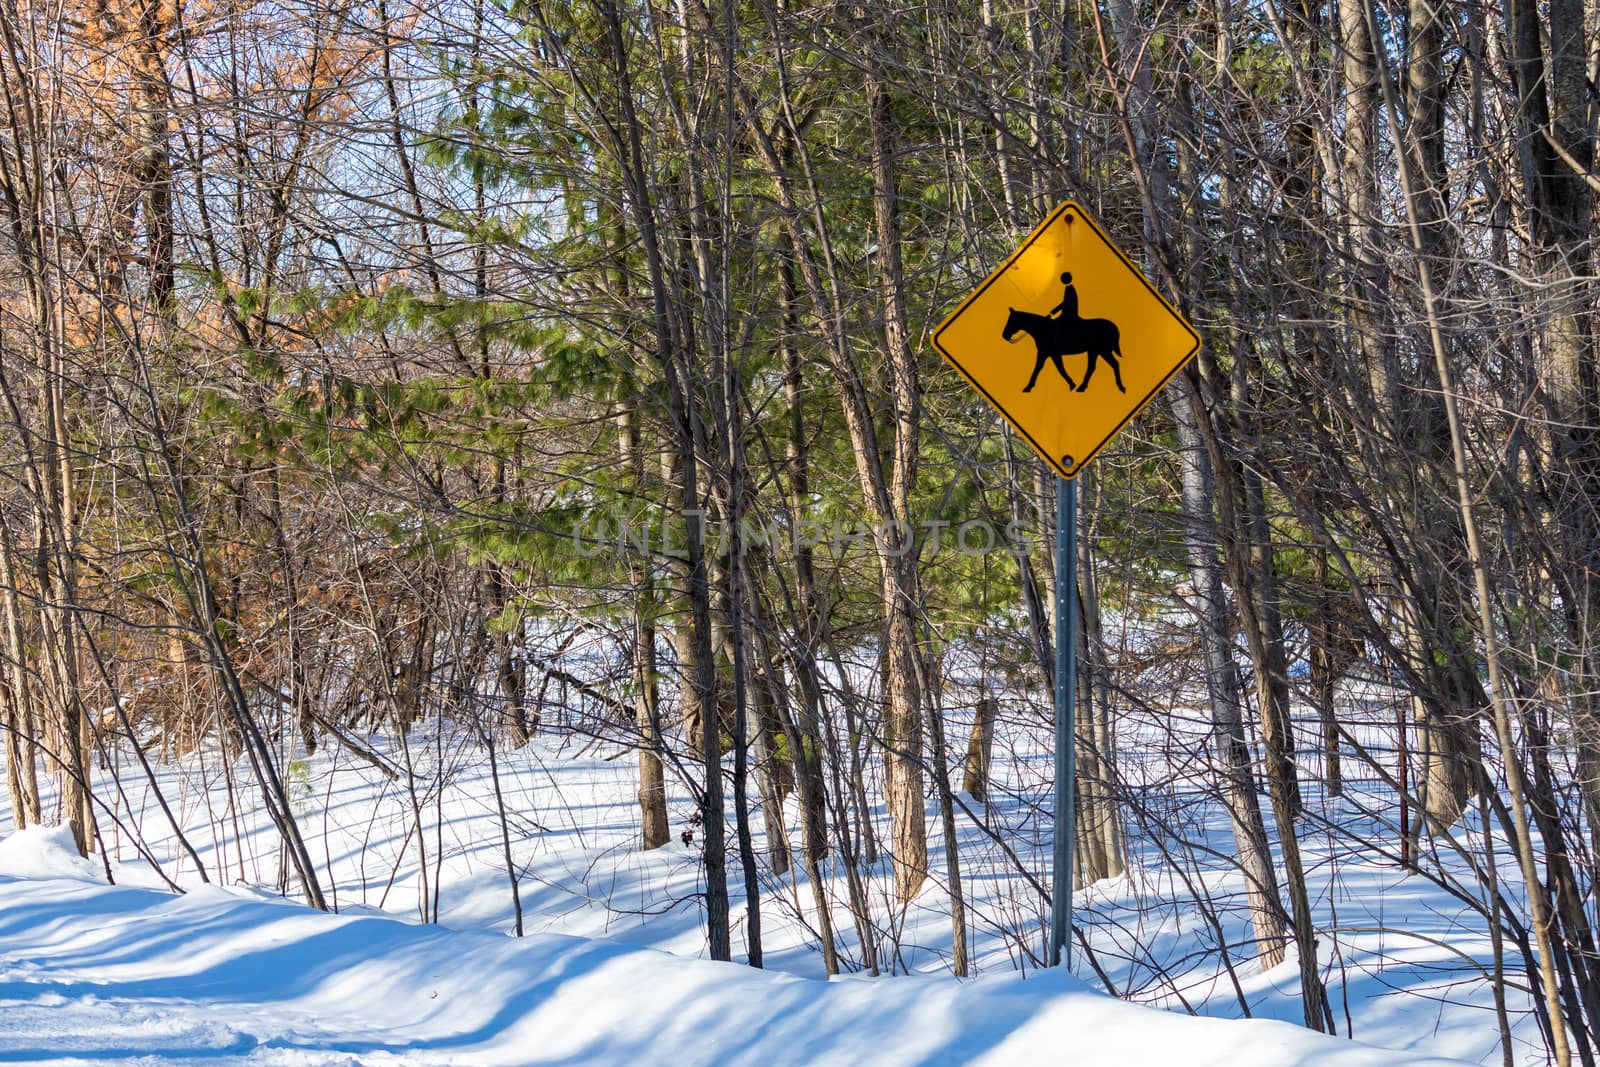 A yellow diamond sign has a pictogram of a person riding a horse, indicating a horseback riding crossing on a rural road. In the countryside during winter, the sign is surrounded by trees and snow.